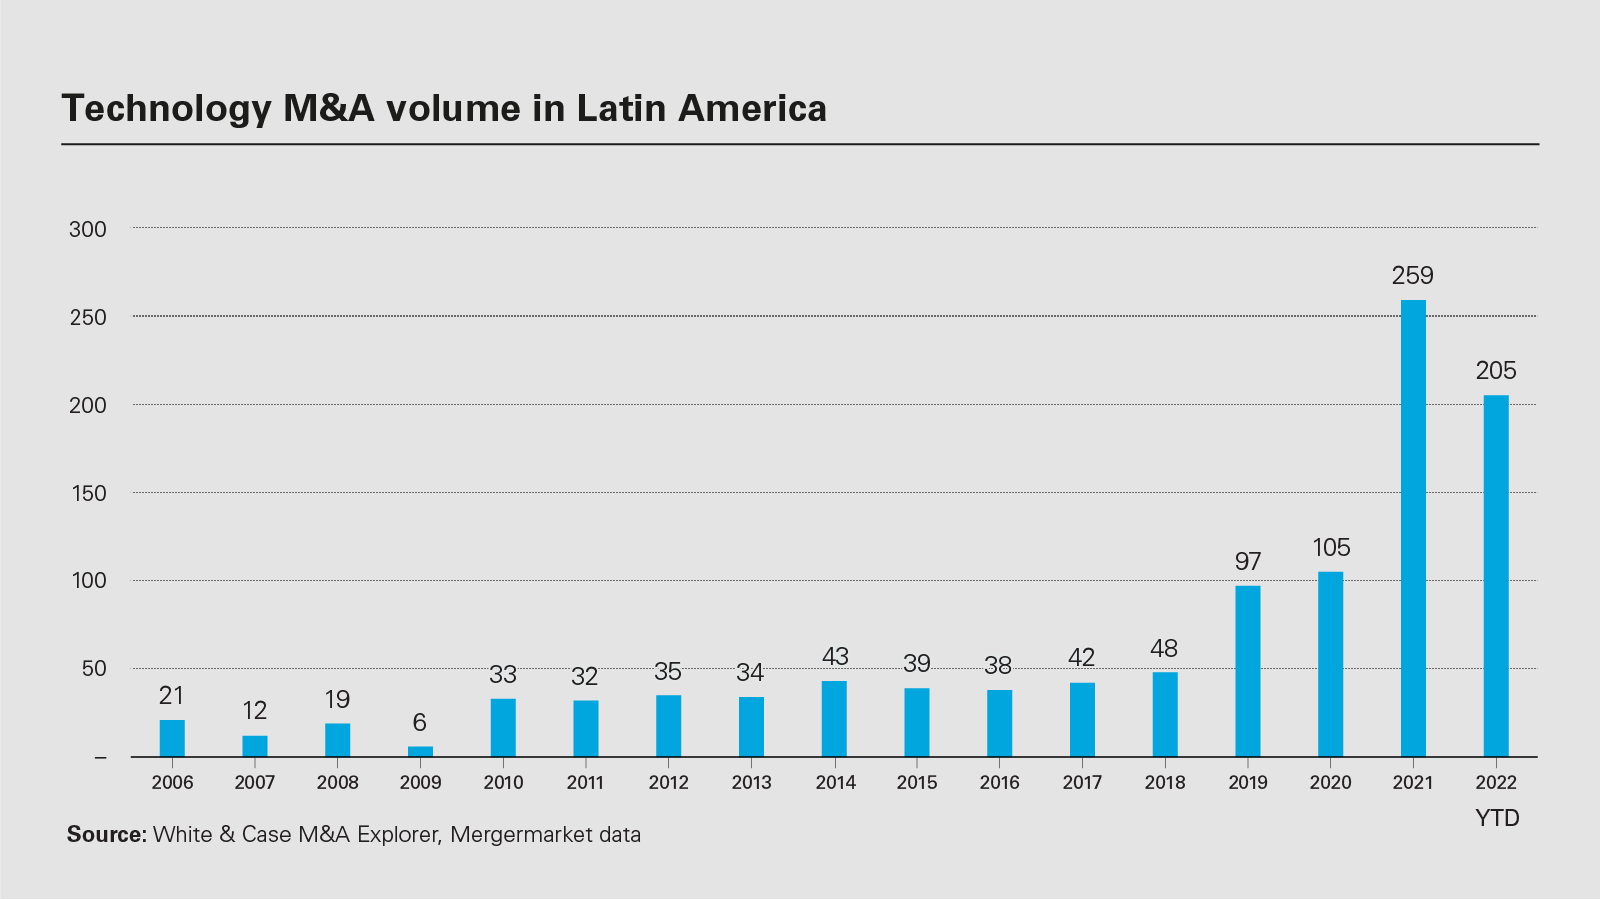 Technology M&A volume in Latin America